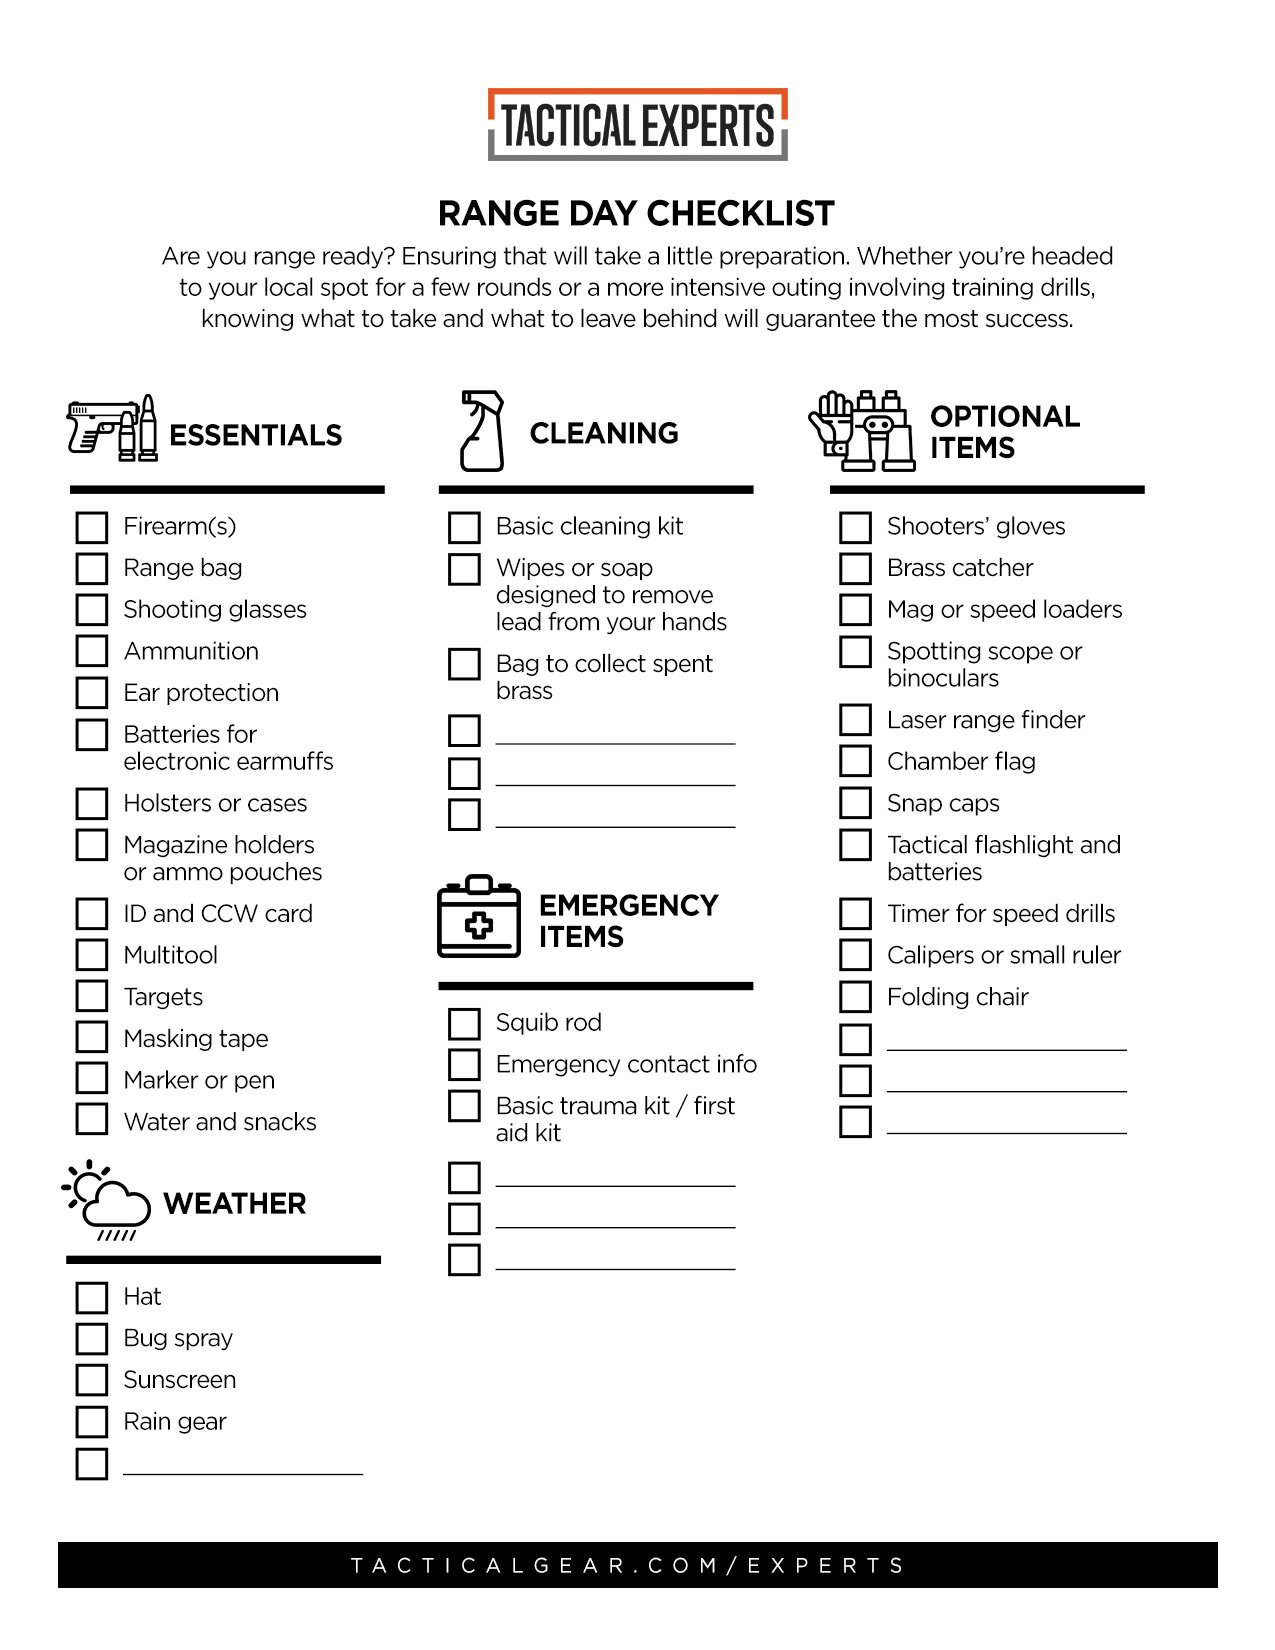 https://assets.cat5.com/images/tactical-experts/range-day-checklist/range-day-checklist-infographic-full.jpg